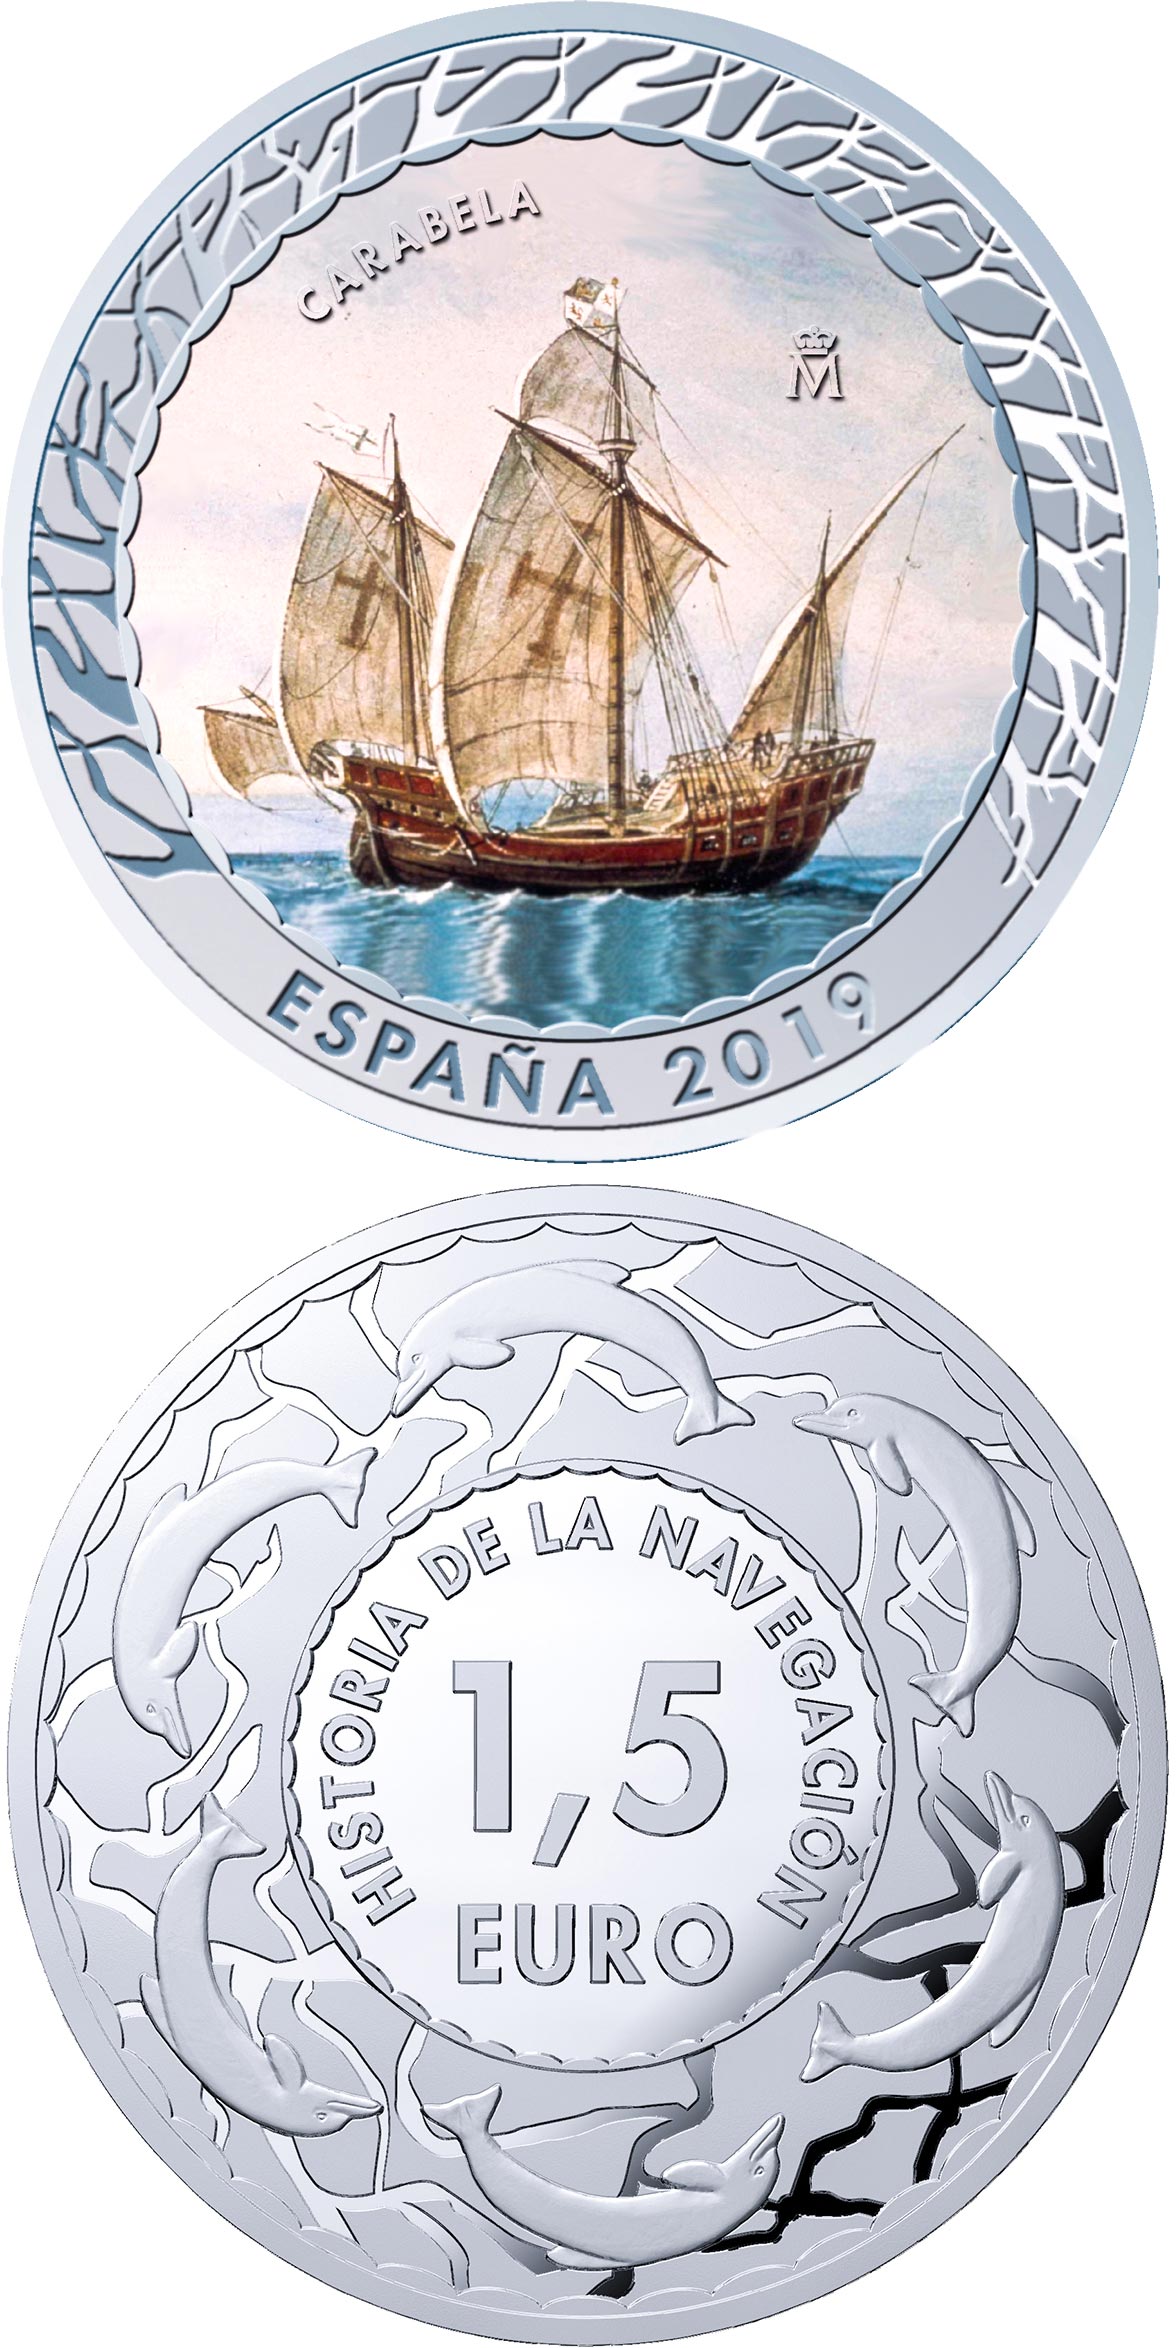 Image of 1.5 euro coin - Caravel | Spain 2019.  The Copper–Nickel (CuNi) coin is of BU quality.